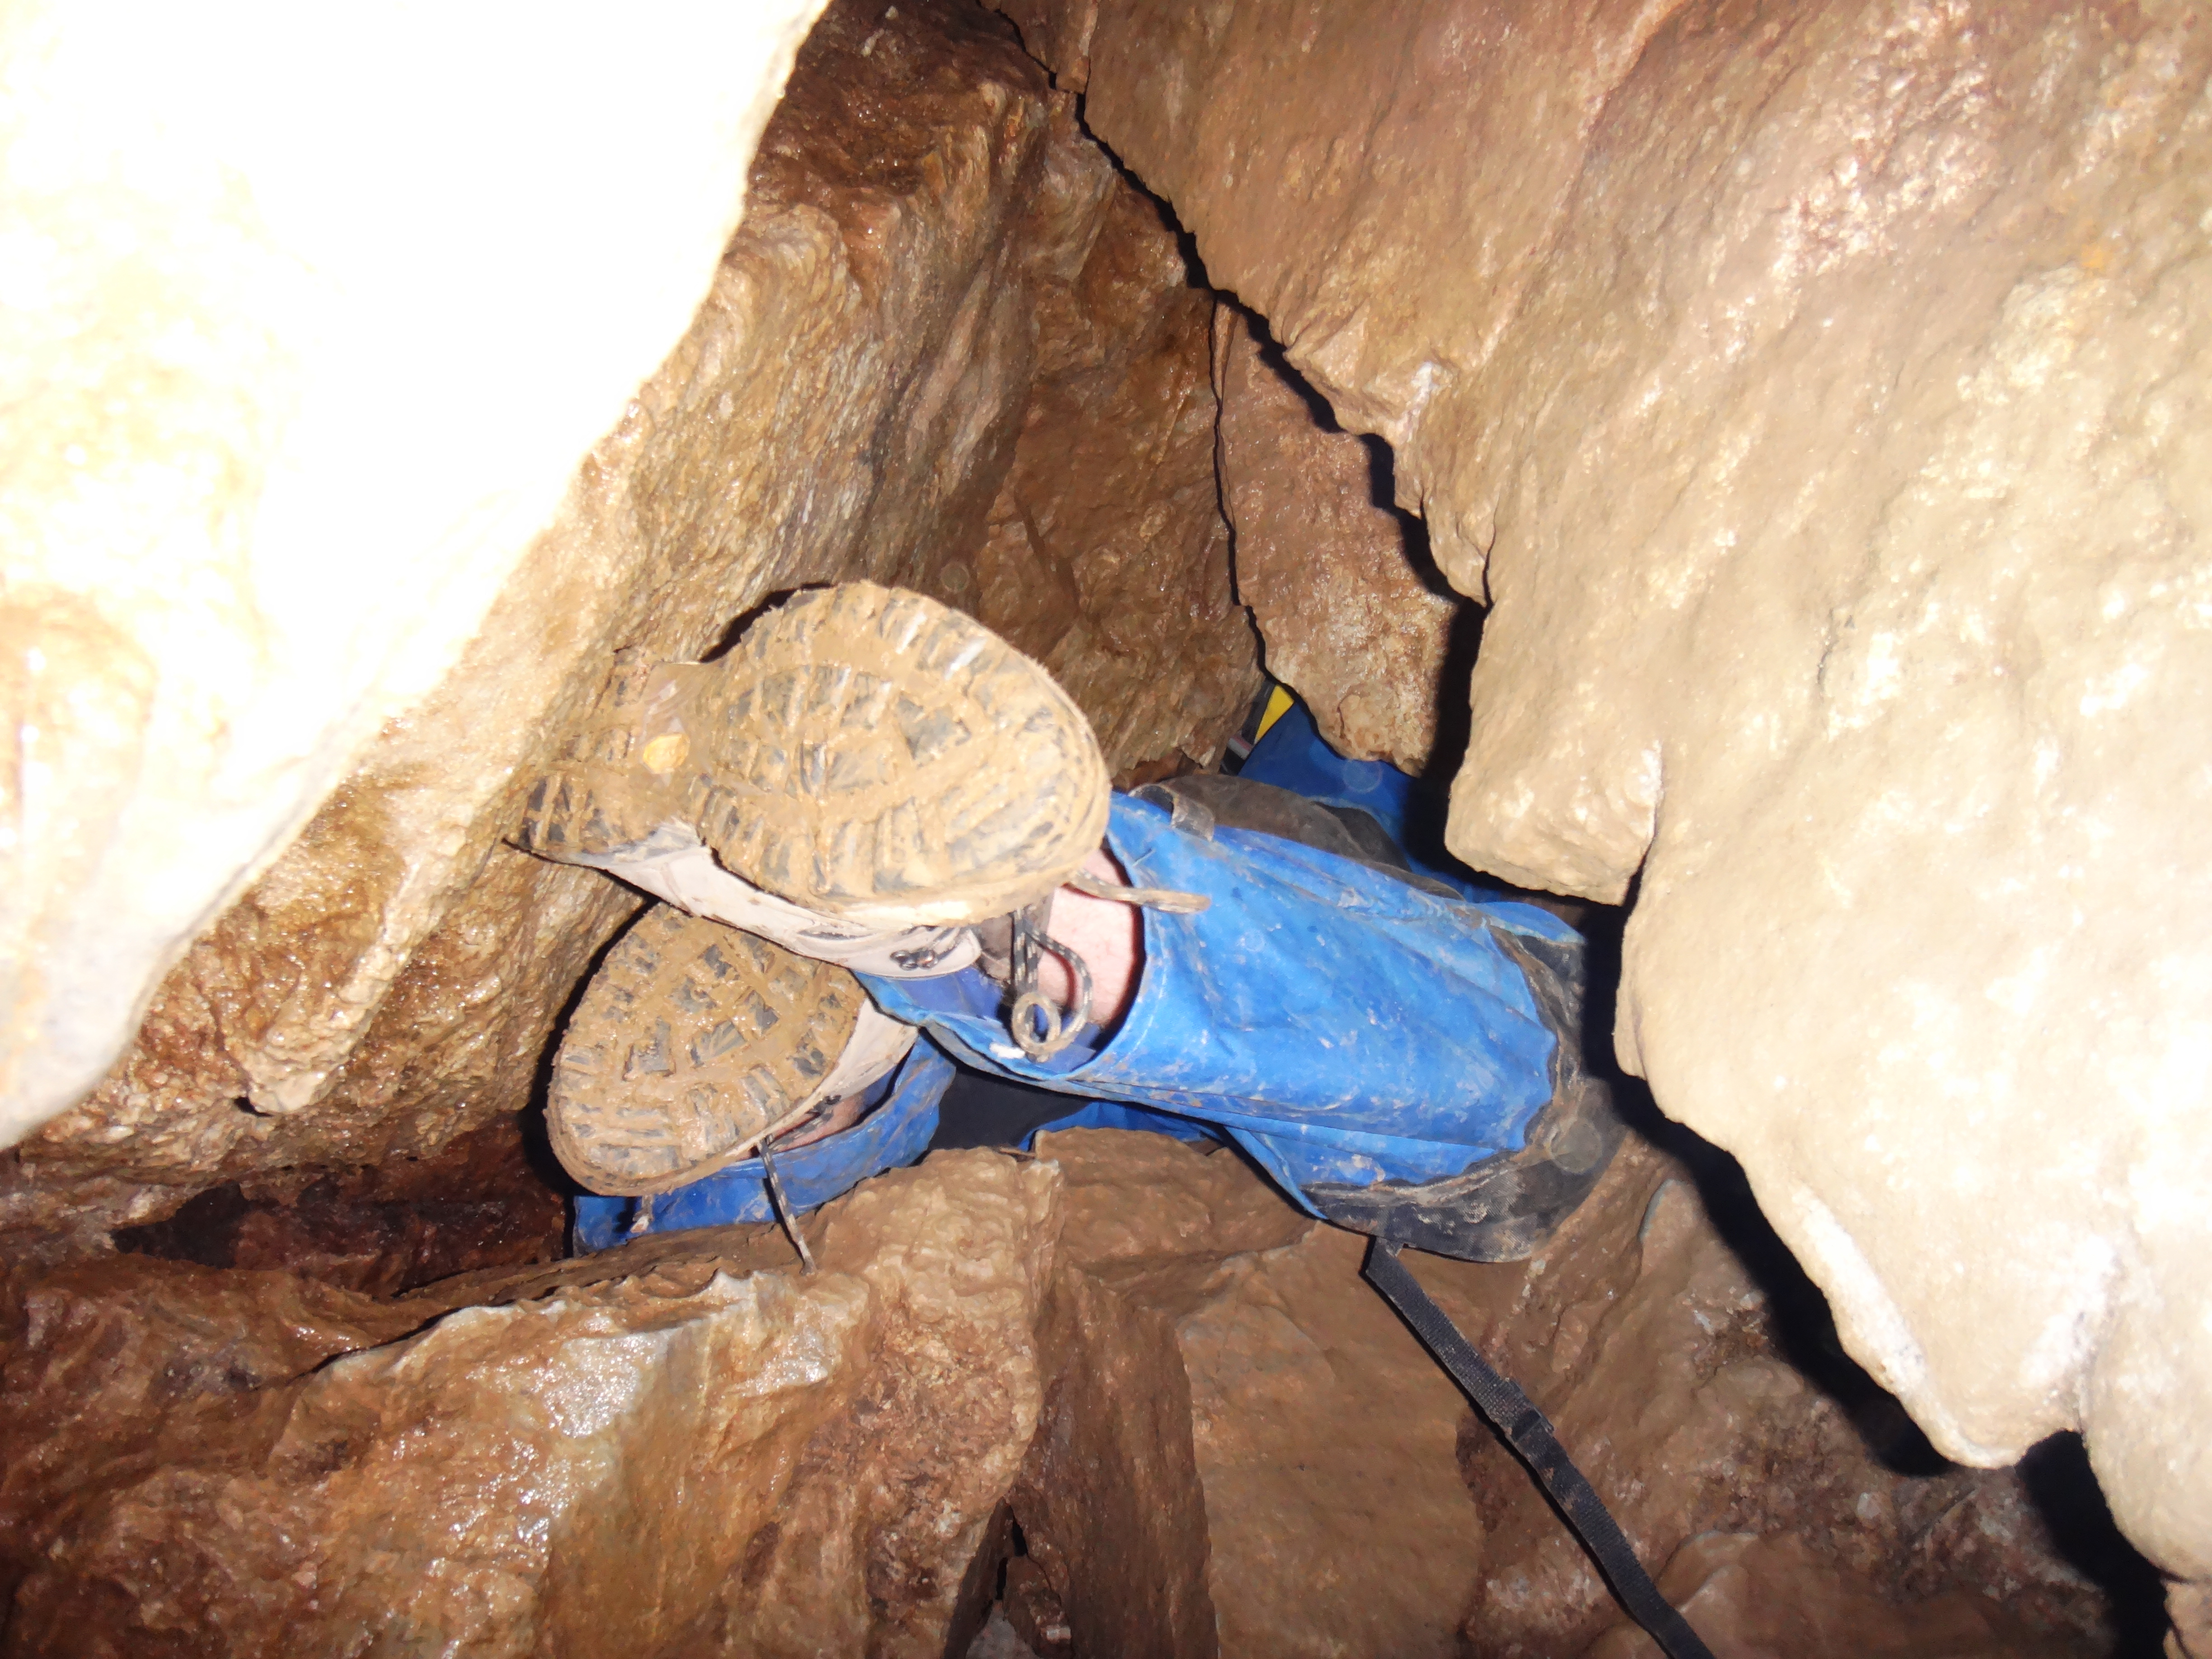 IV. Essential Equipment for Caving and Spelunking